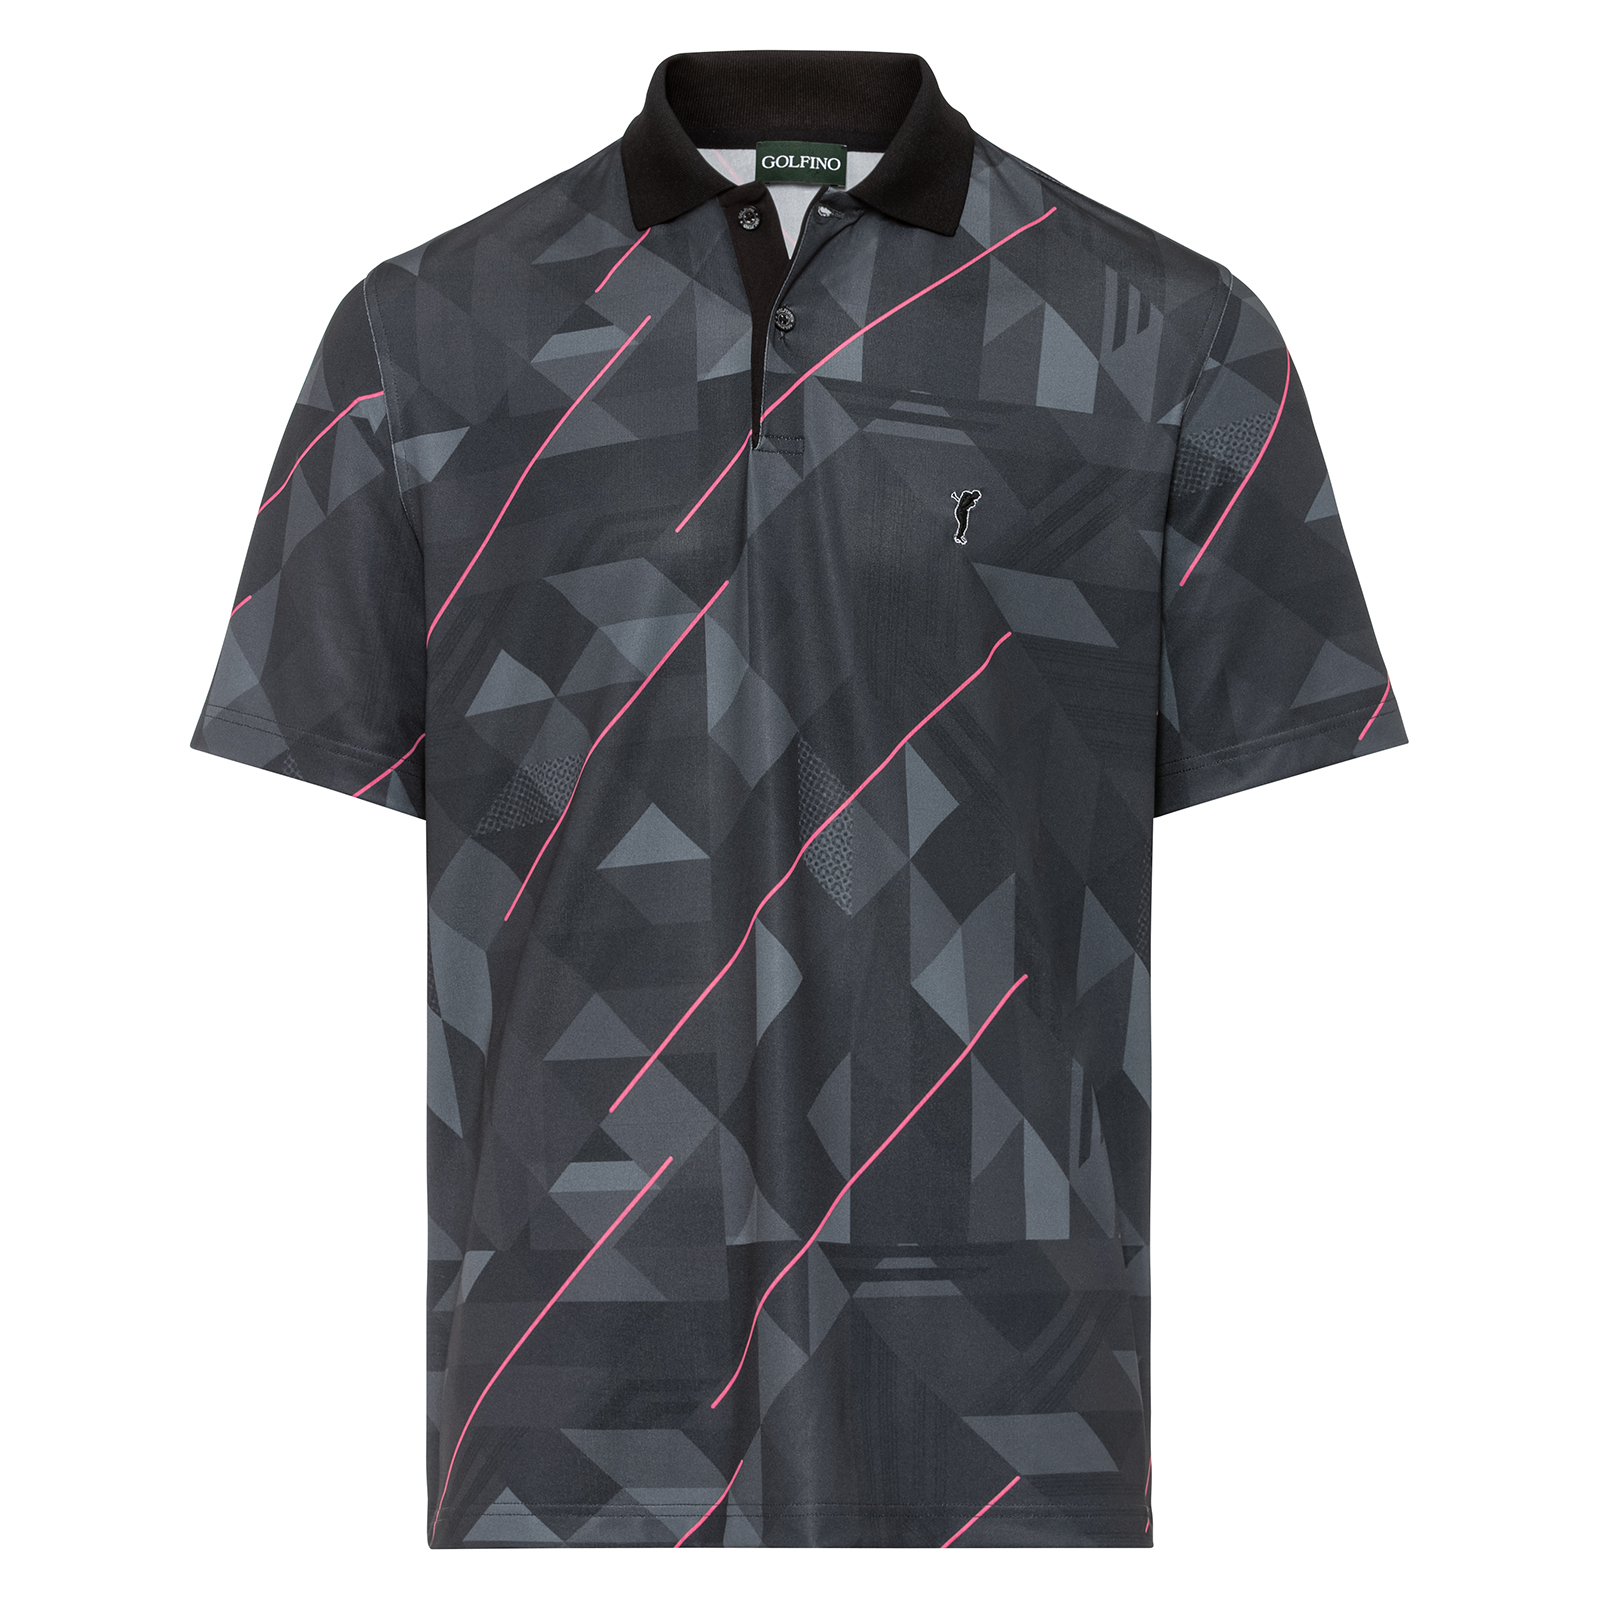 Men’s statement polo shirt with all-over print